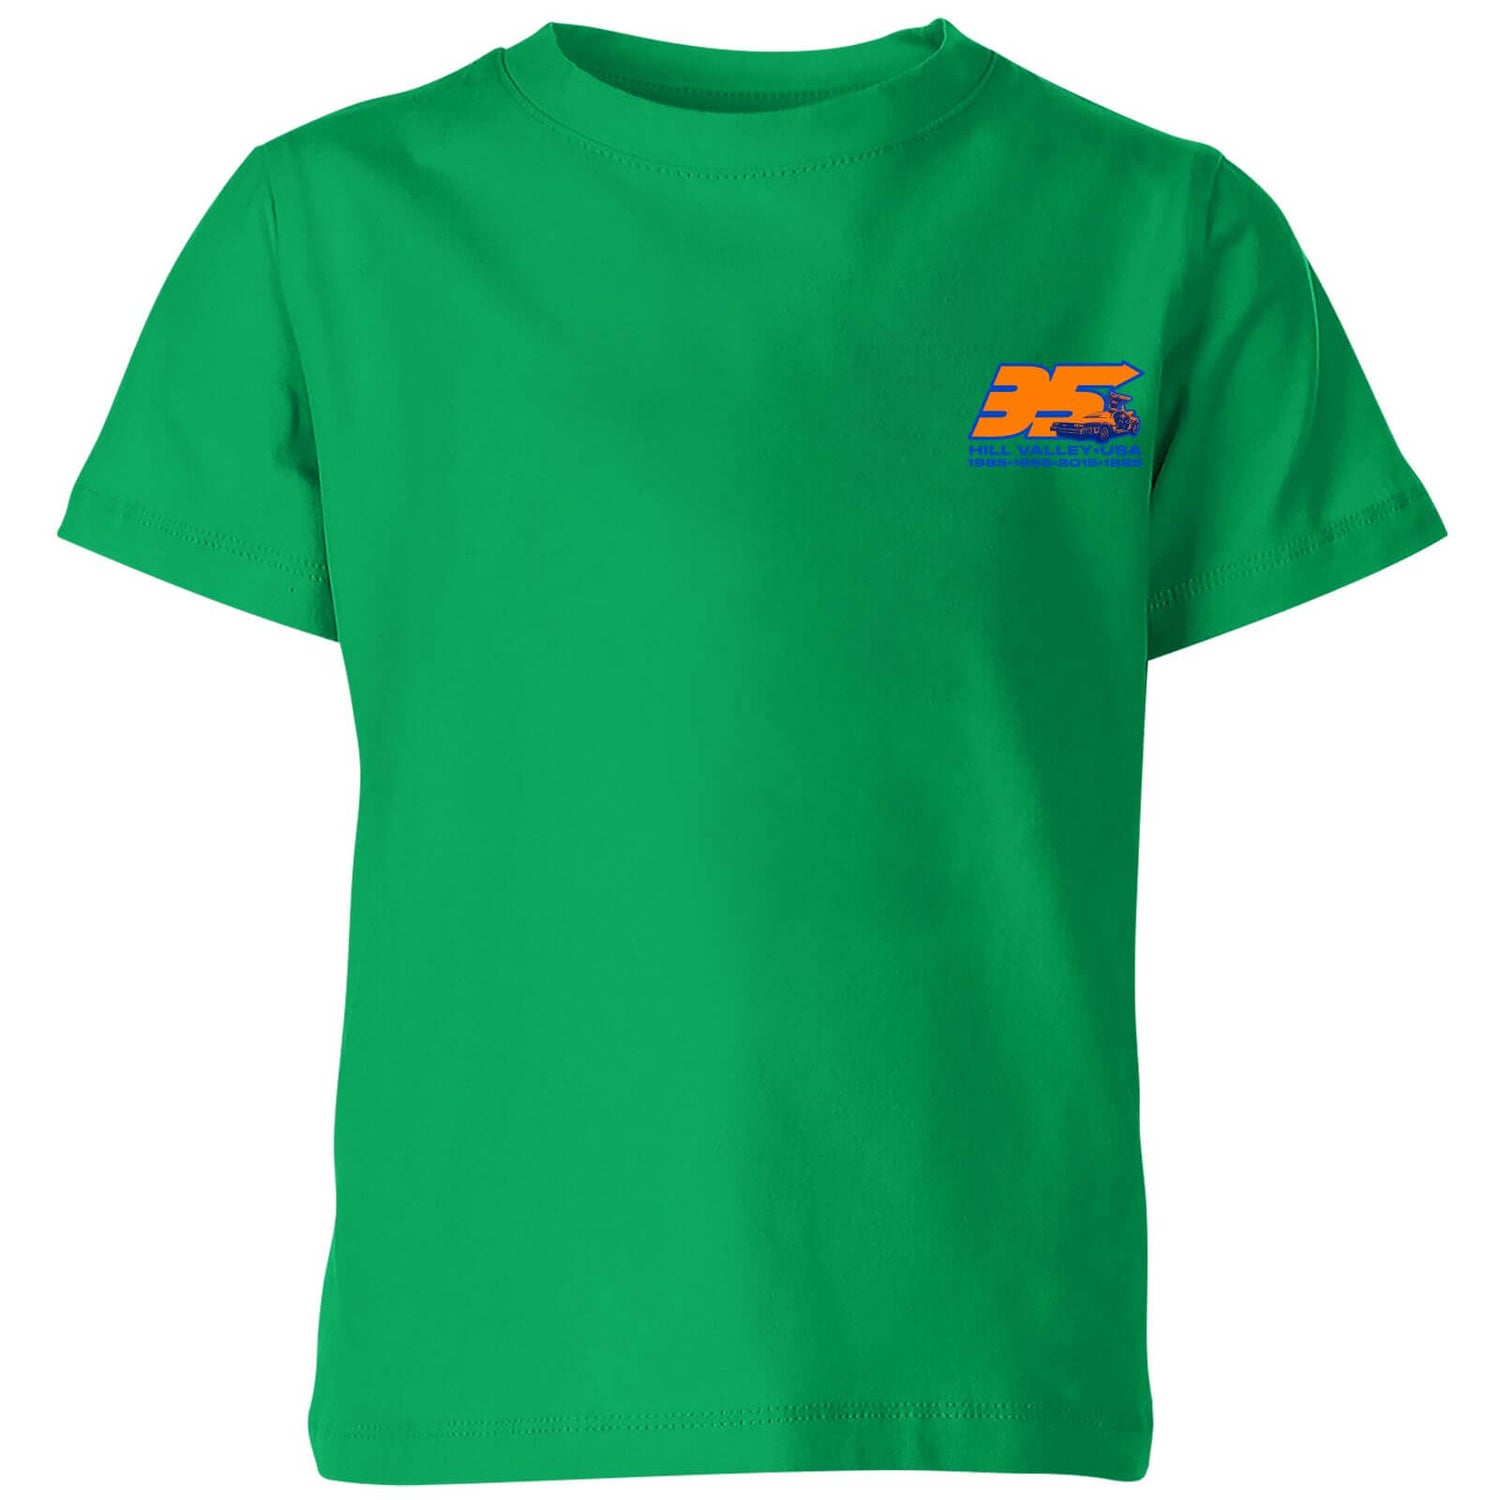 Back To The Future 35 Hill Valley Front Kids' T-Shirt - Green